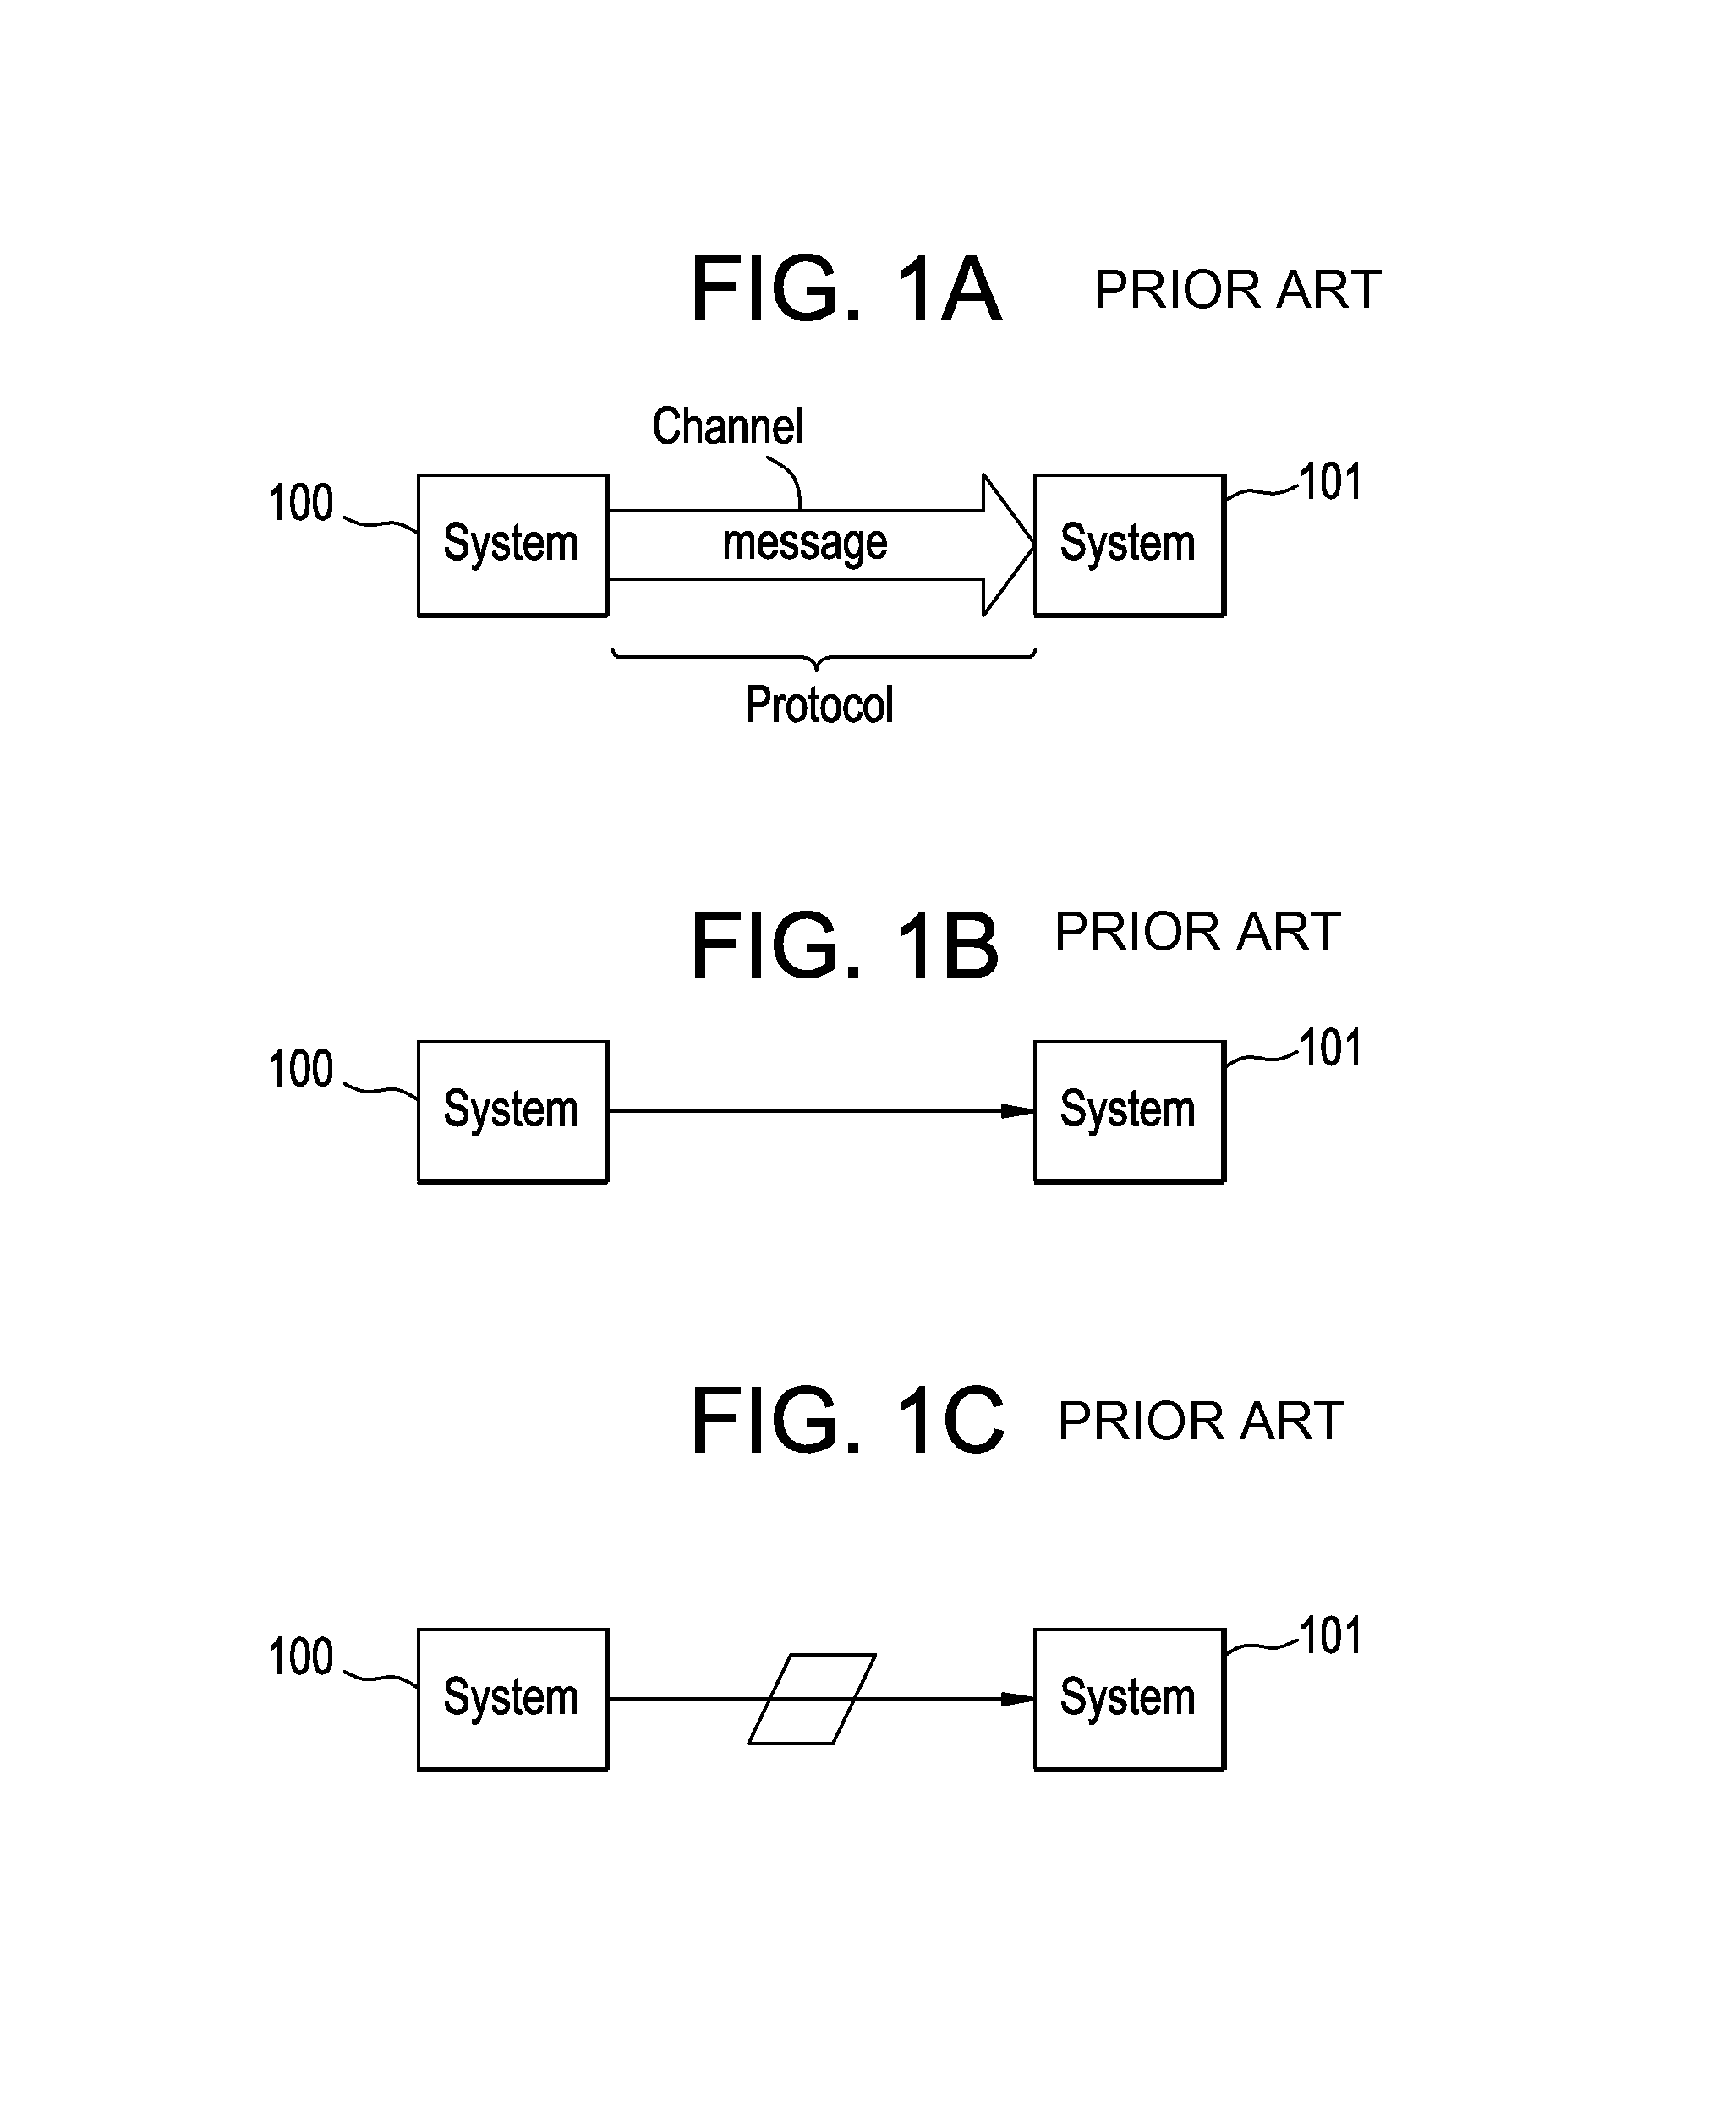 Integration server supporting multiple receiving channels